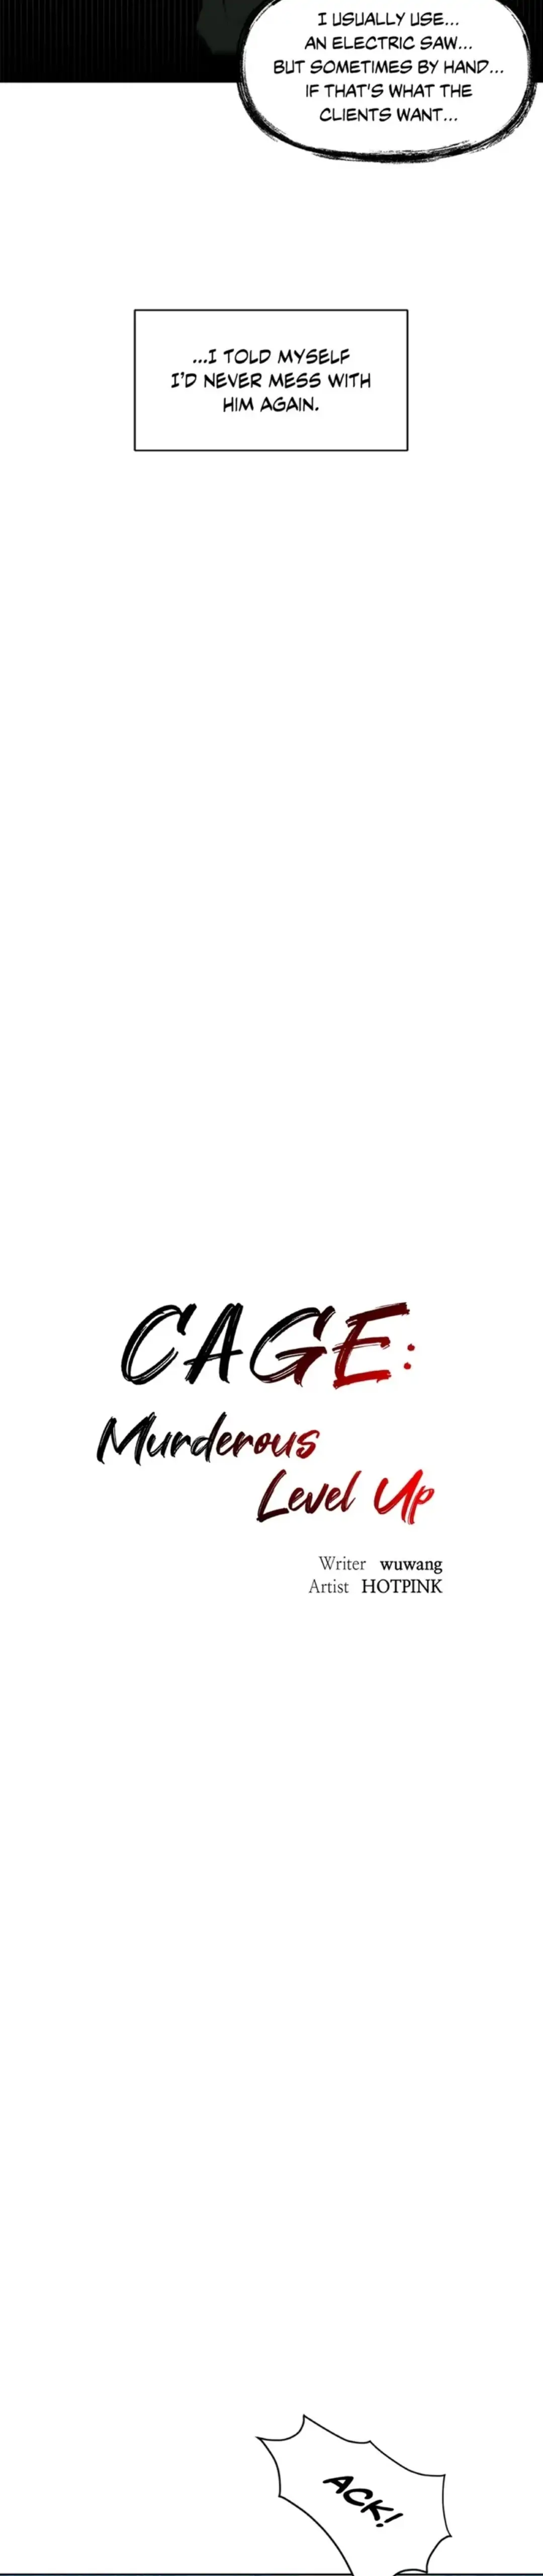 Cage: Murderous Level Up - Page 2